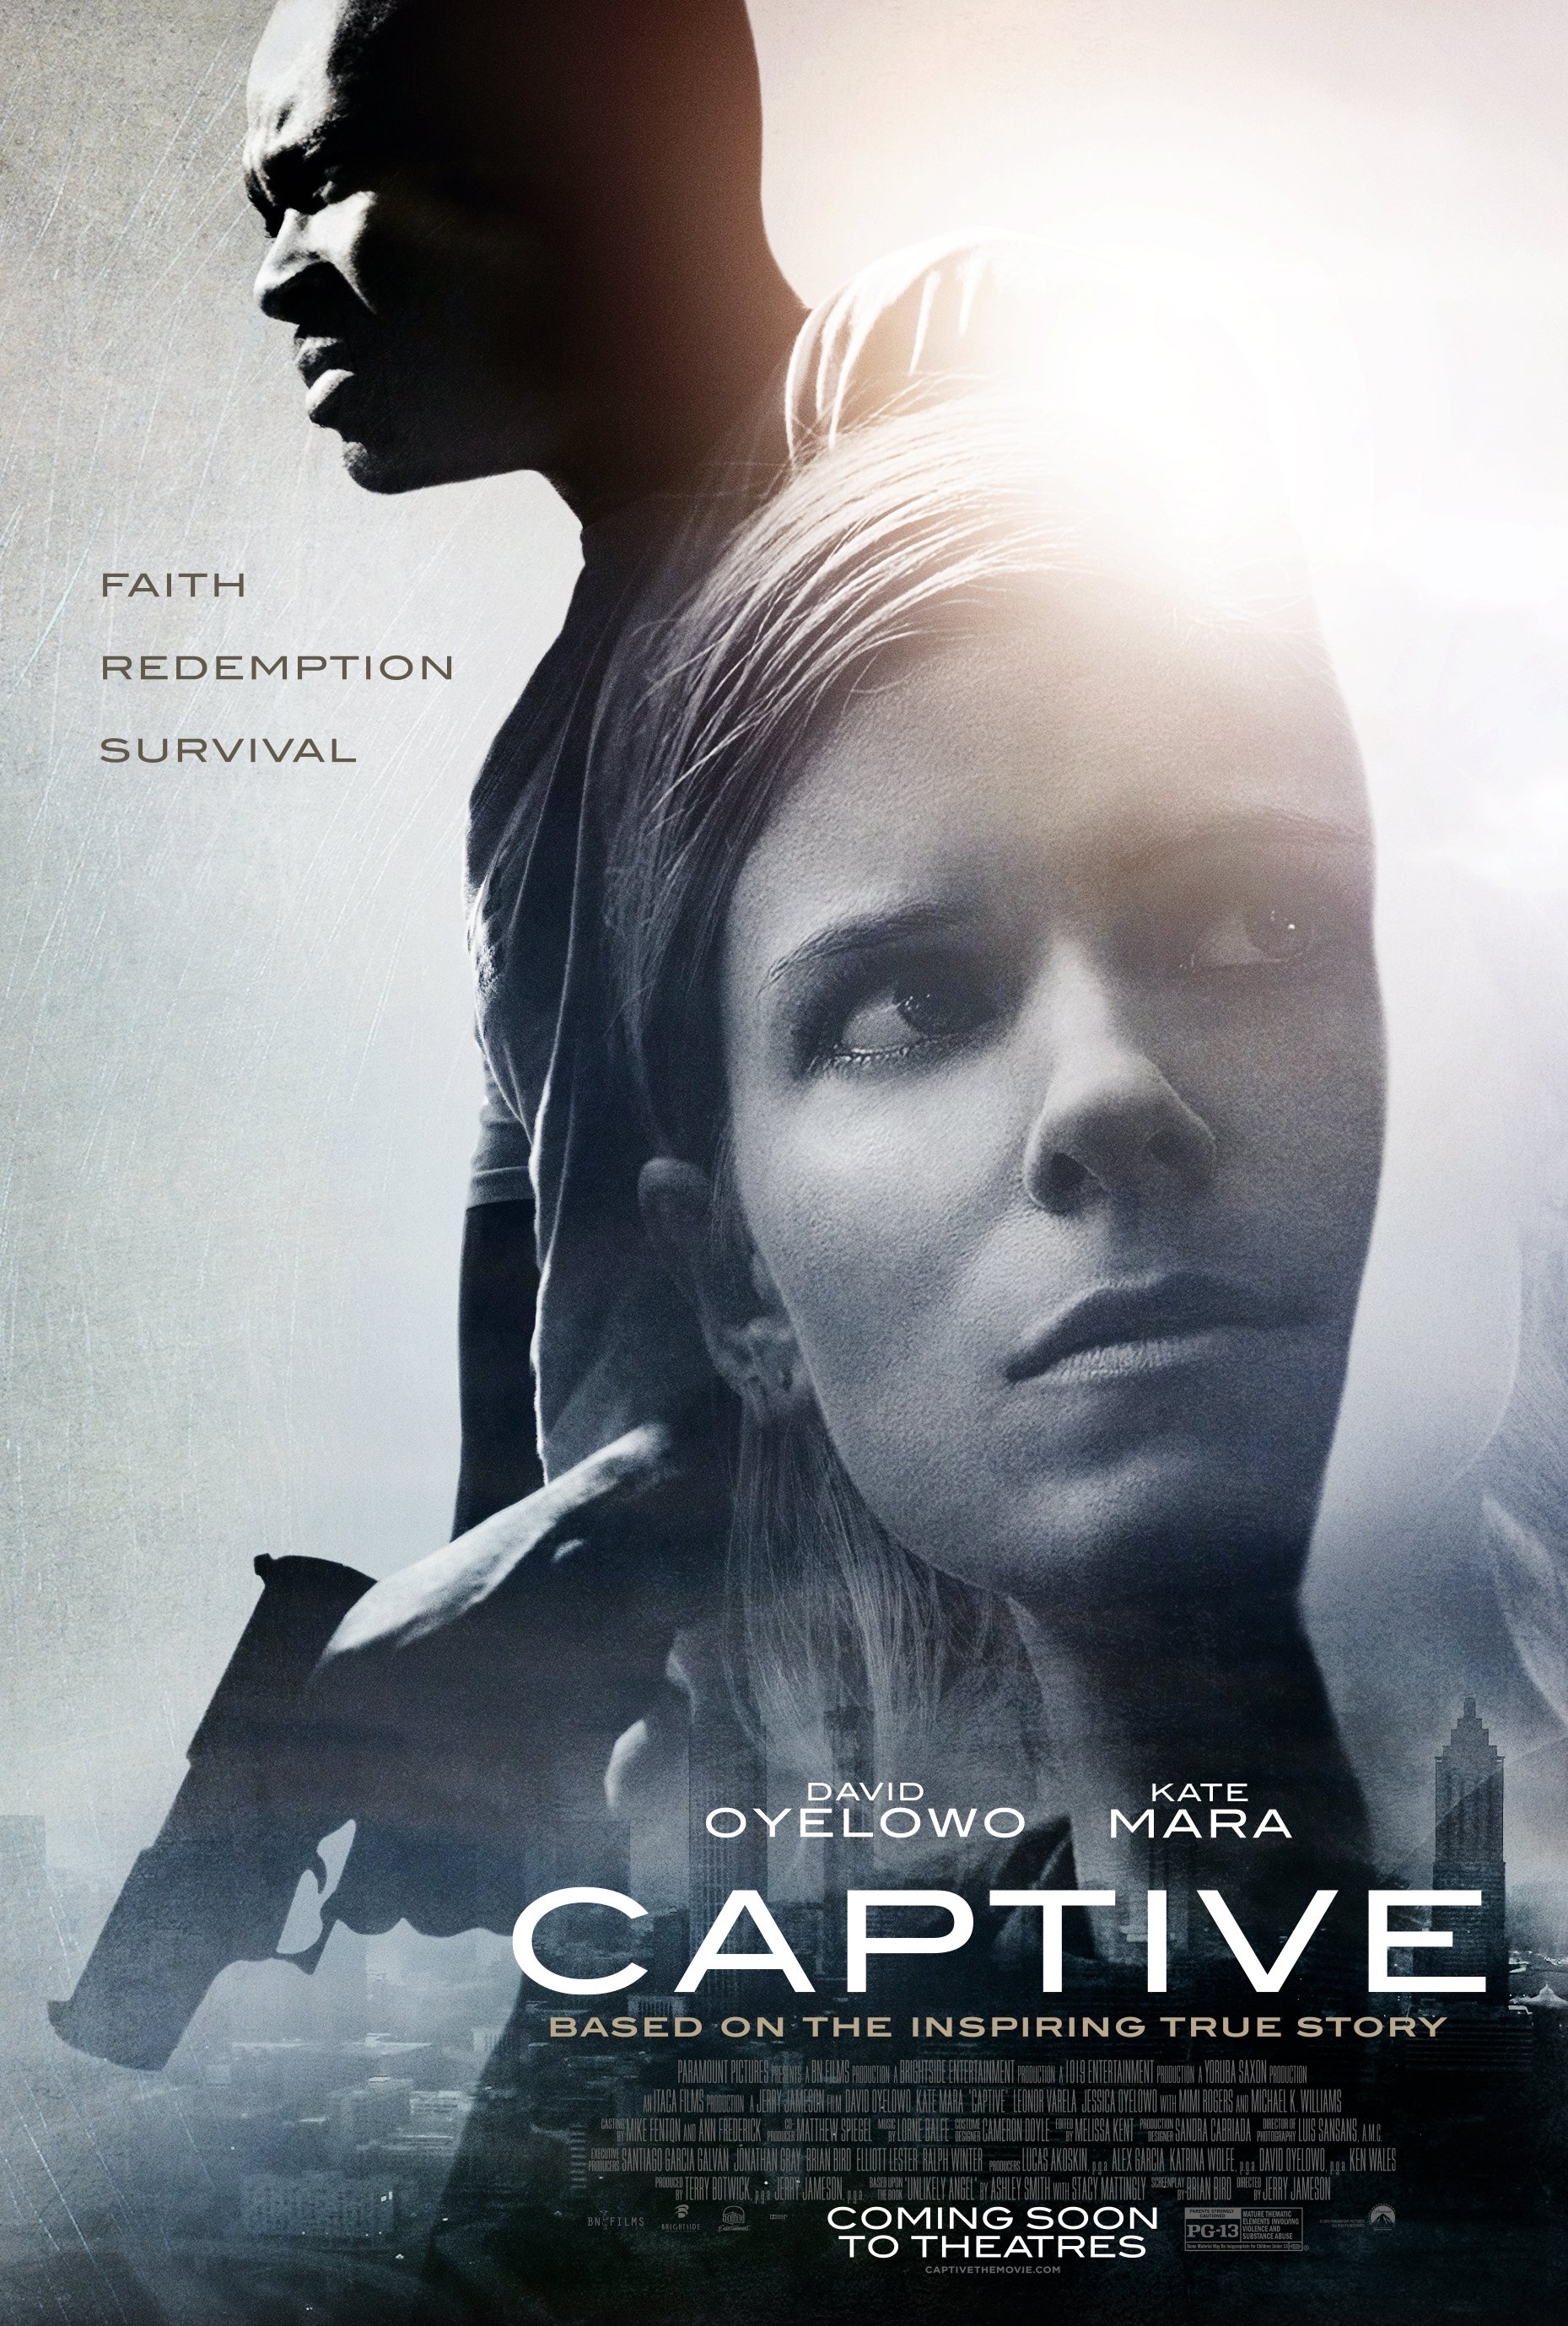 Poster of the movie Captive